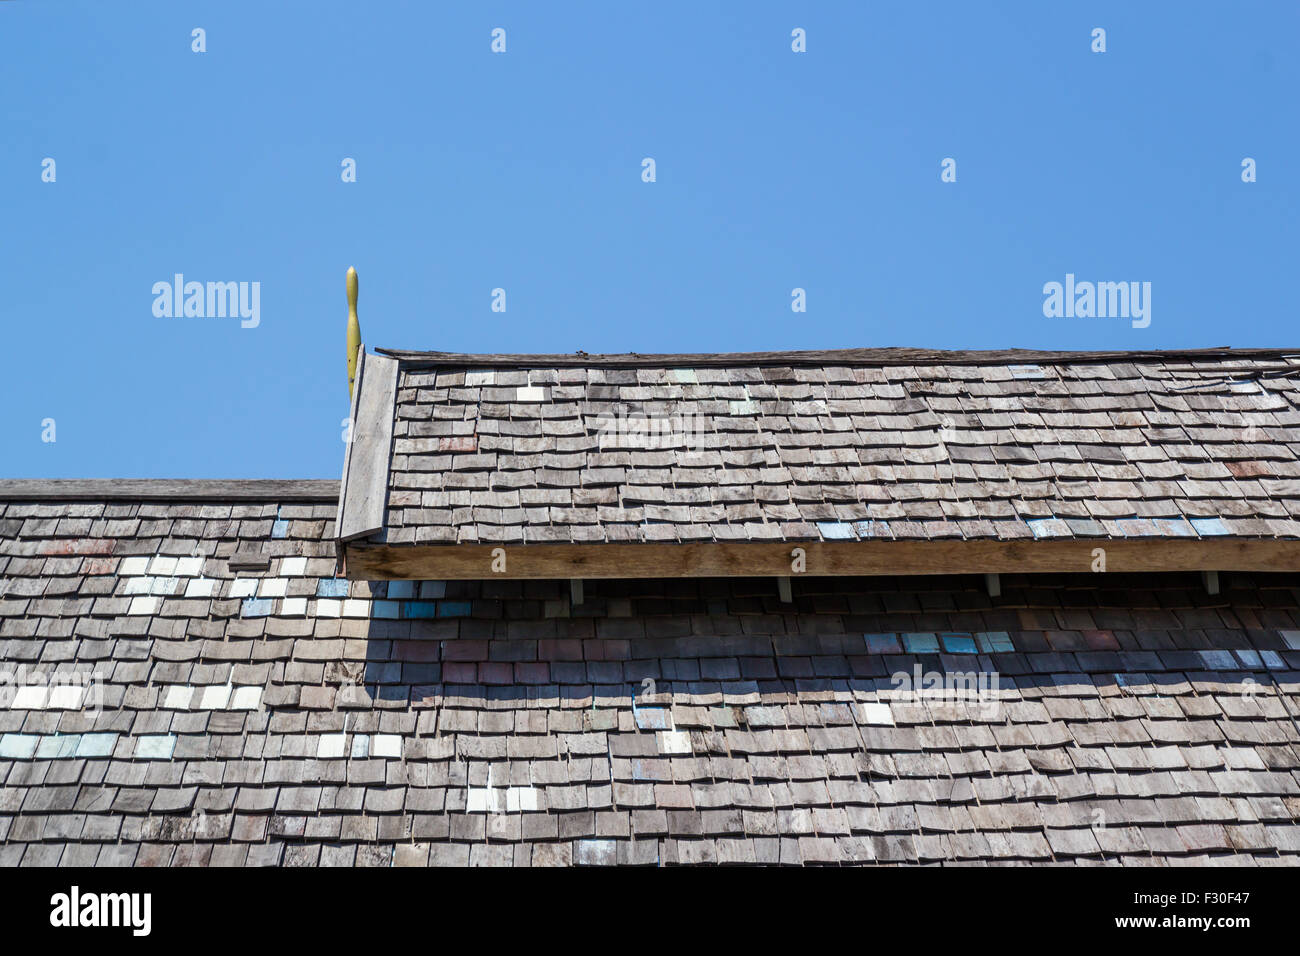 Wood roofing pattern detail on blue sky background Stock Photo